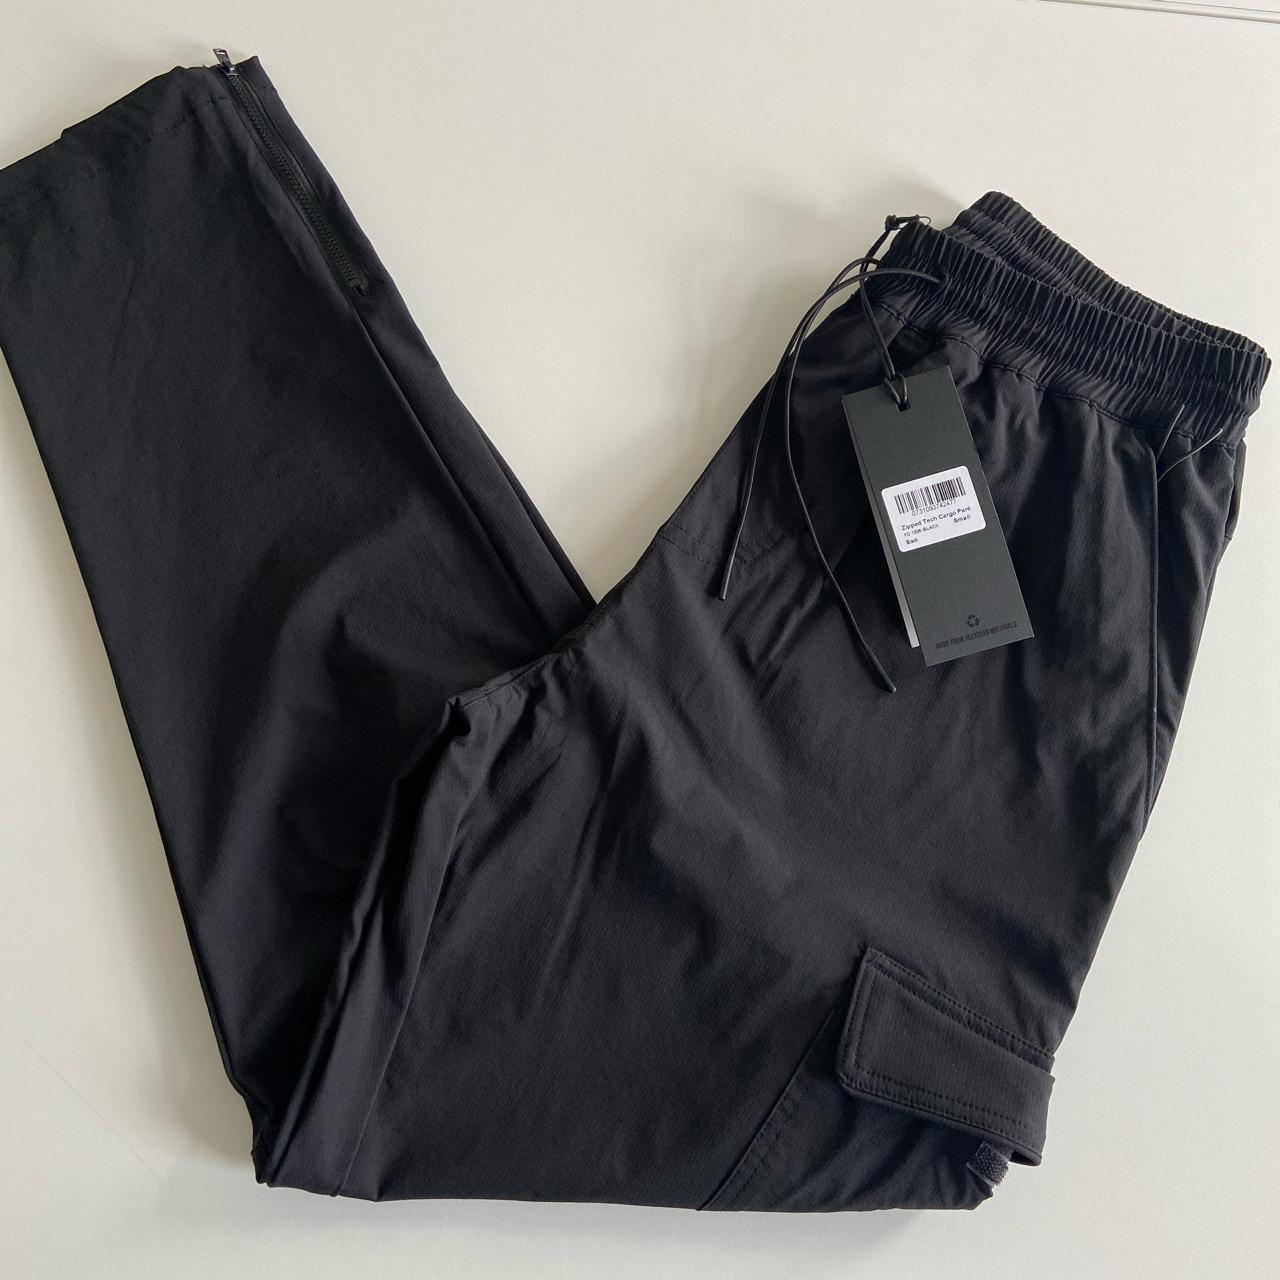 Faded zip cargo pants size small, black, new with tags - Depop